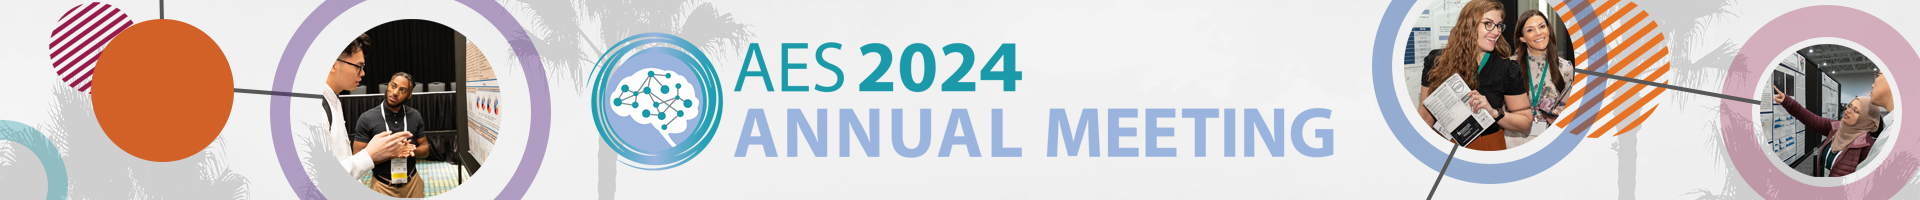 2024 Annual Meeting Event Banner